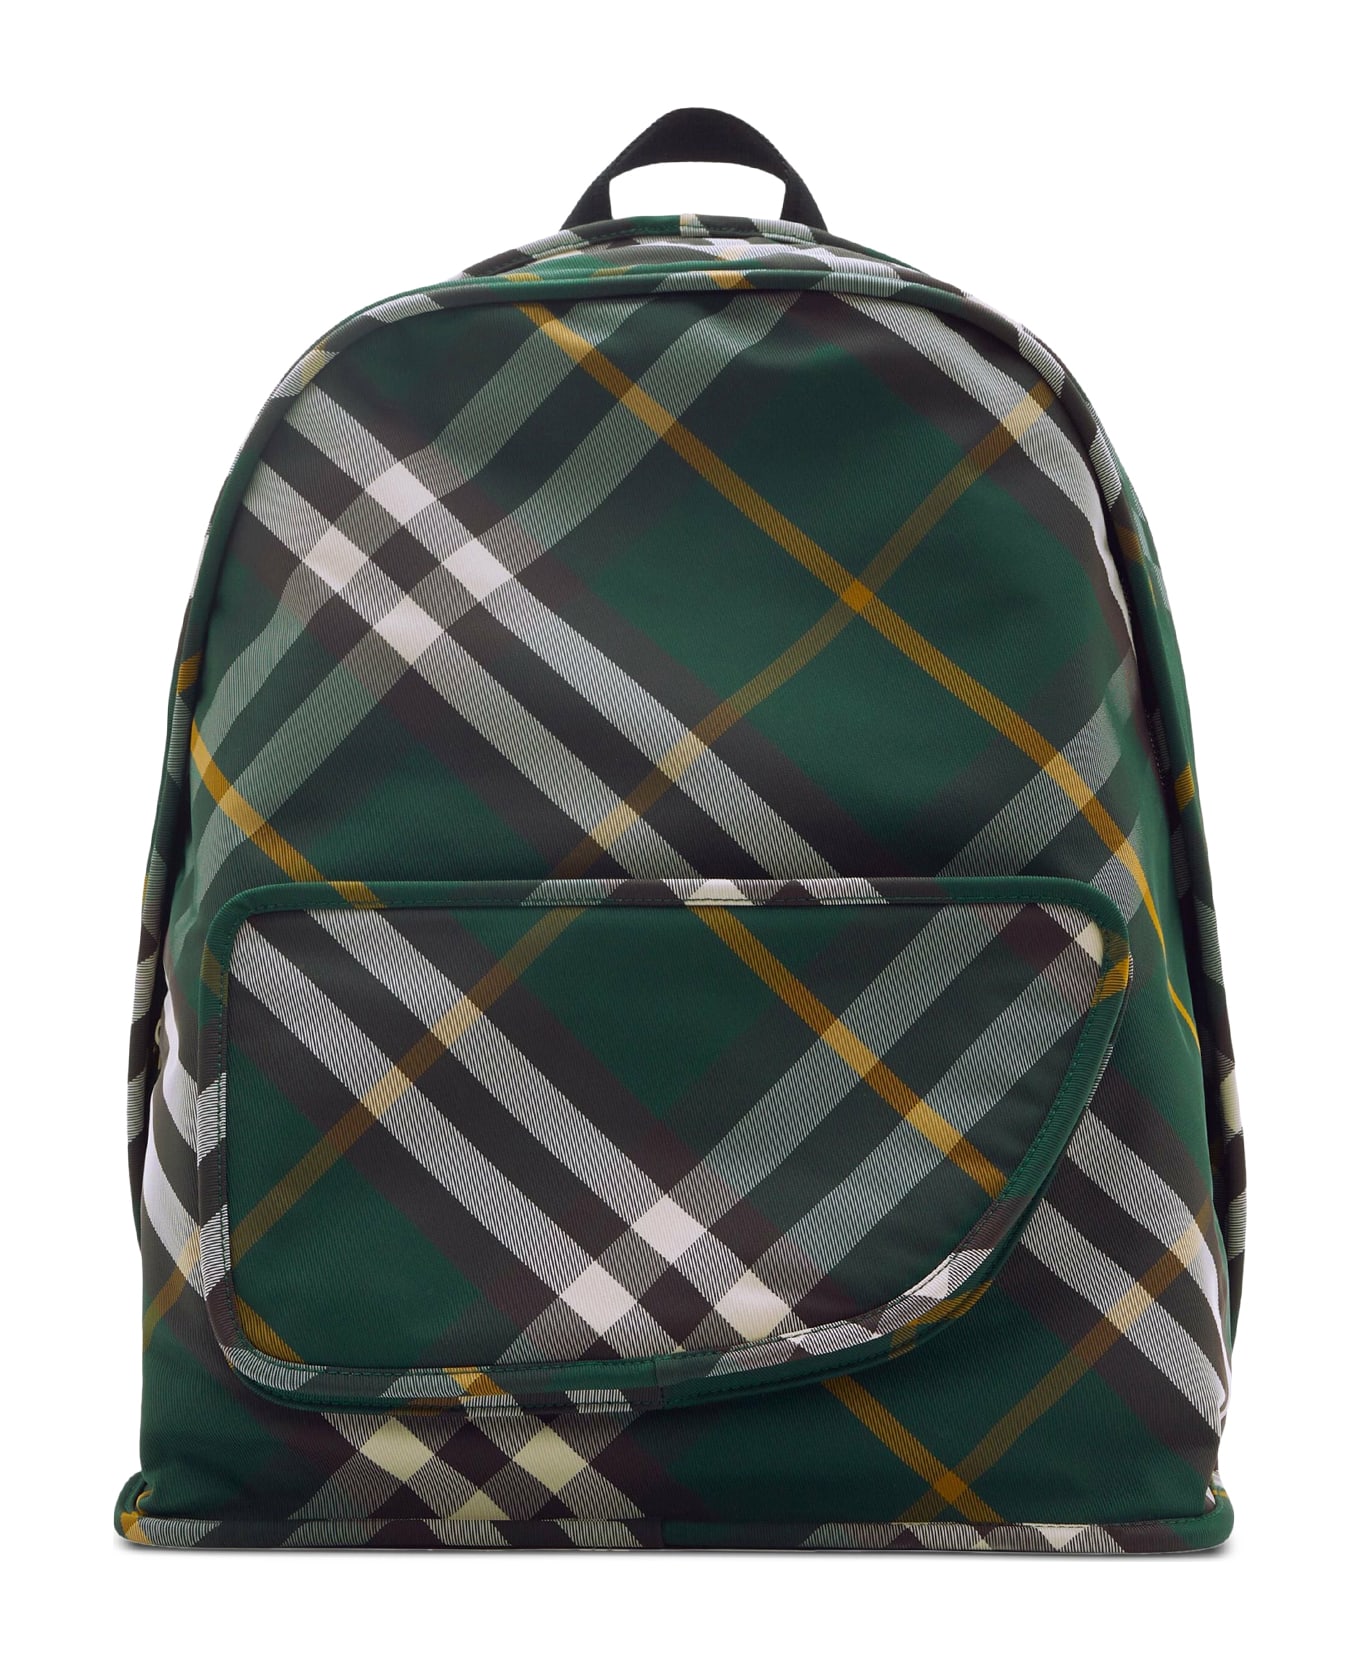 Burberry Ml Shield Backpack S21 Men`s Bags - Ivy